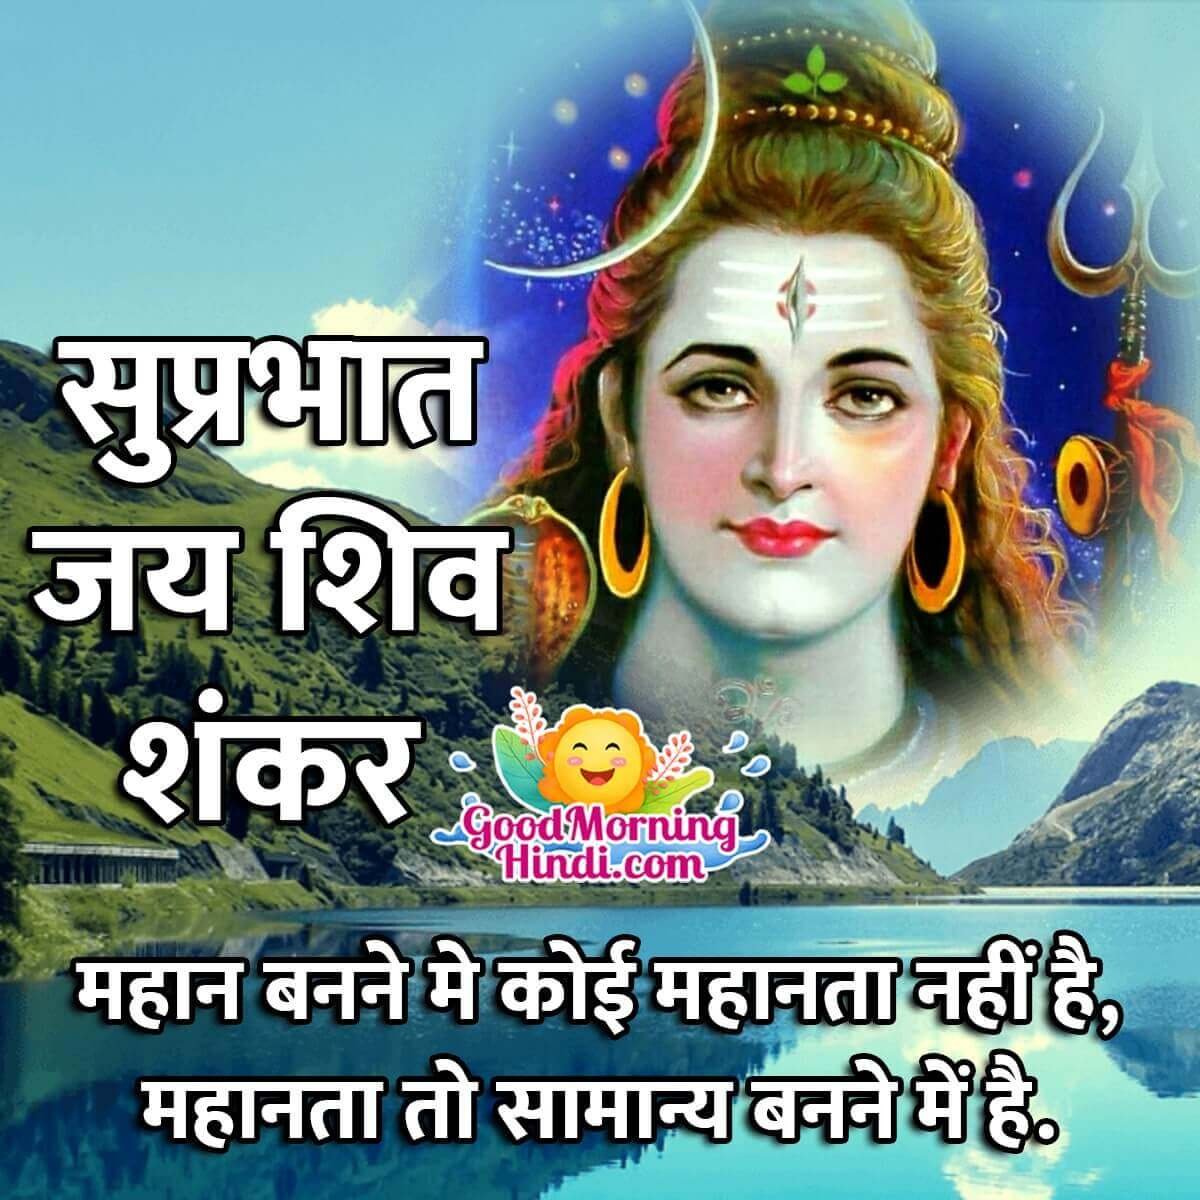 Good Morning God Images With Hindi Quotes - Good Morning Wishes ...